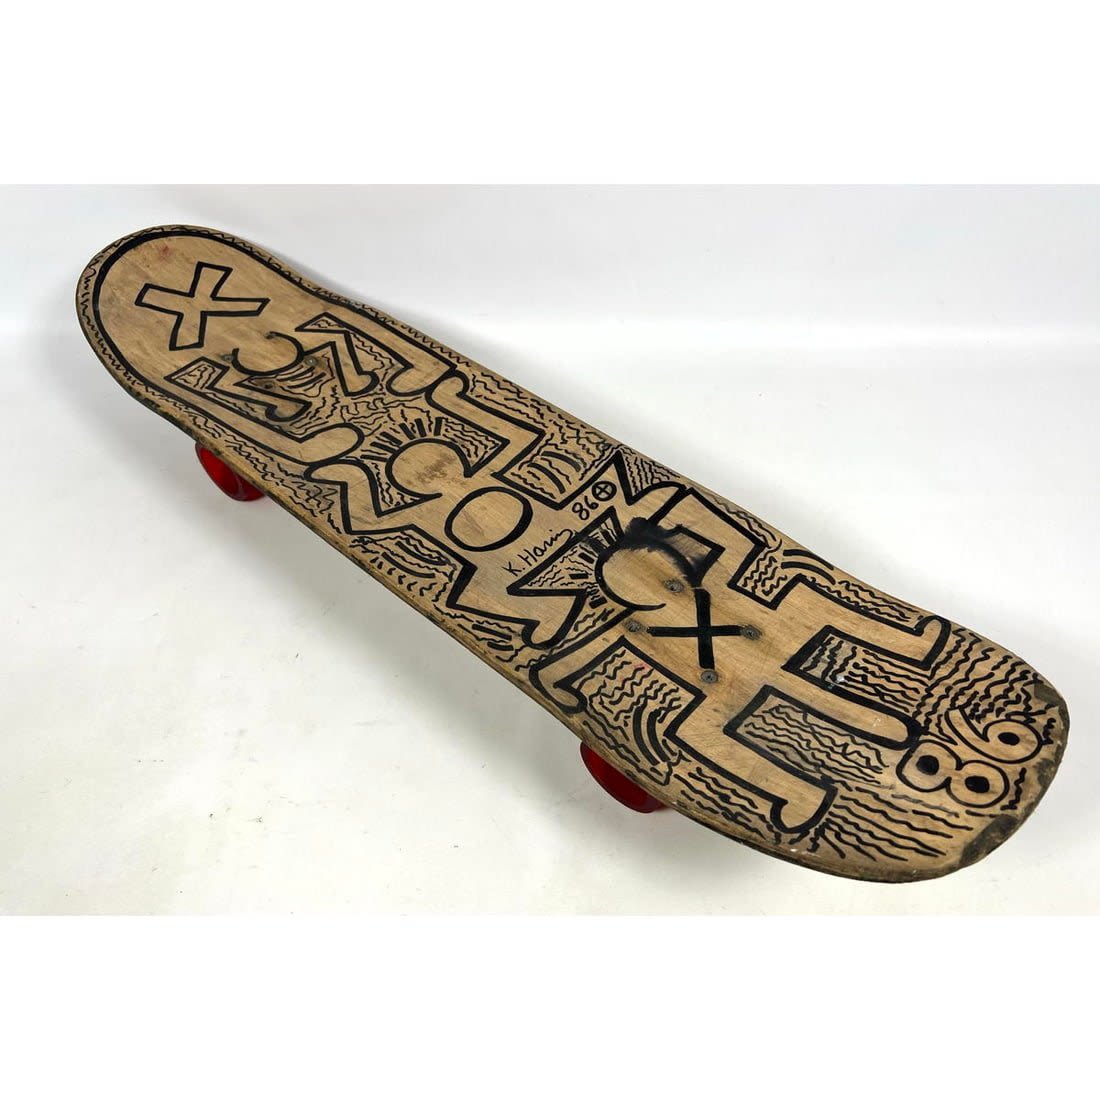 Vintage Skateboard painted in the